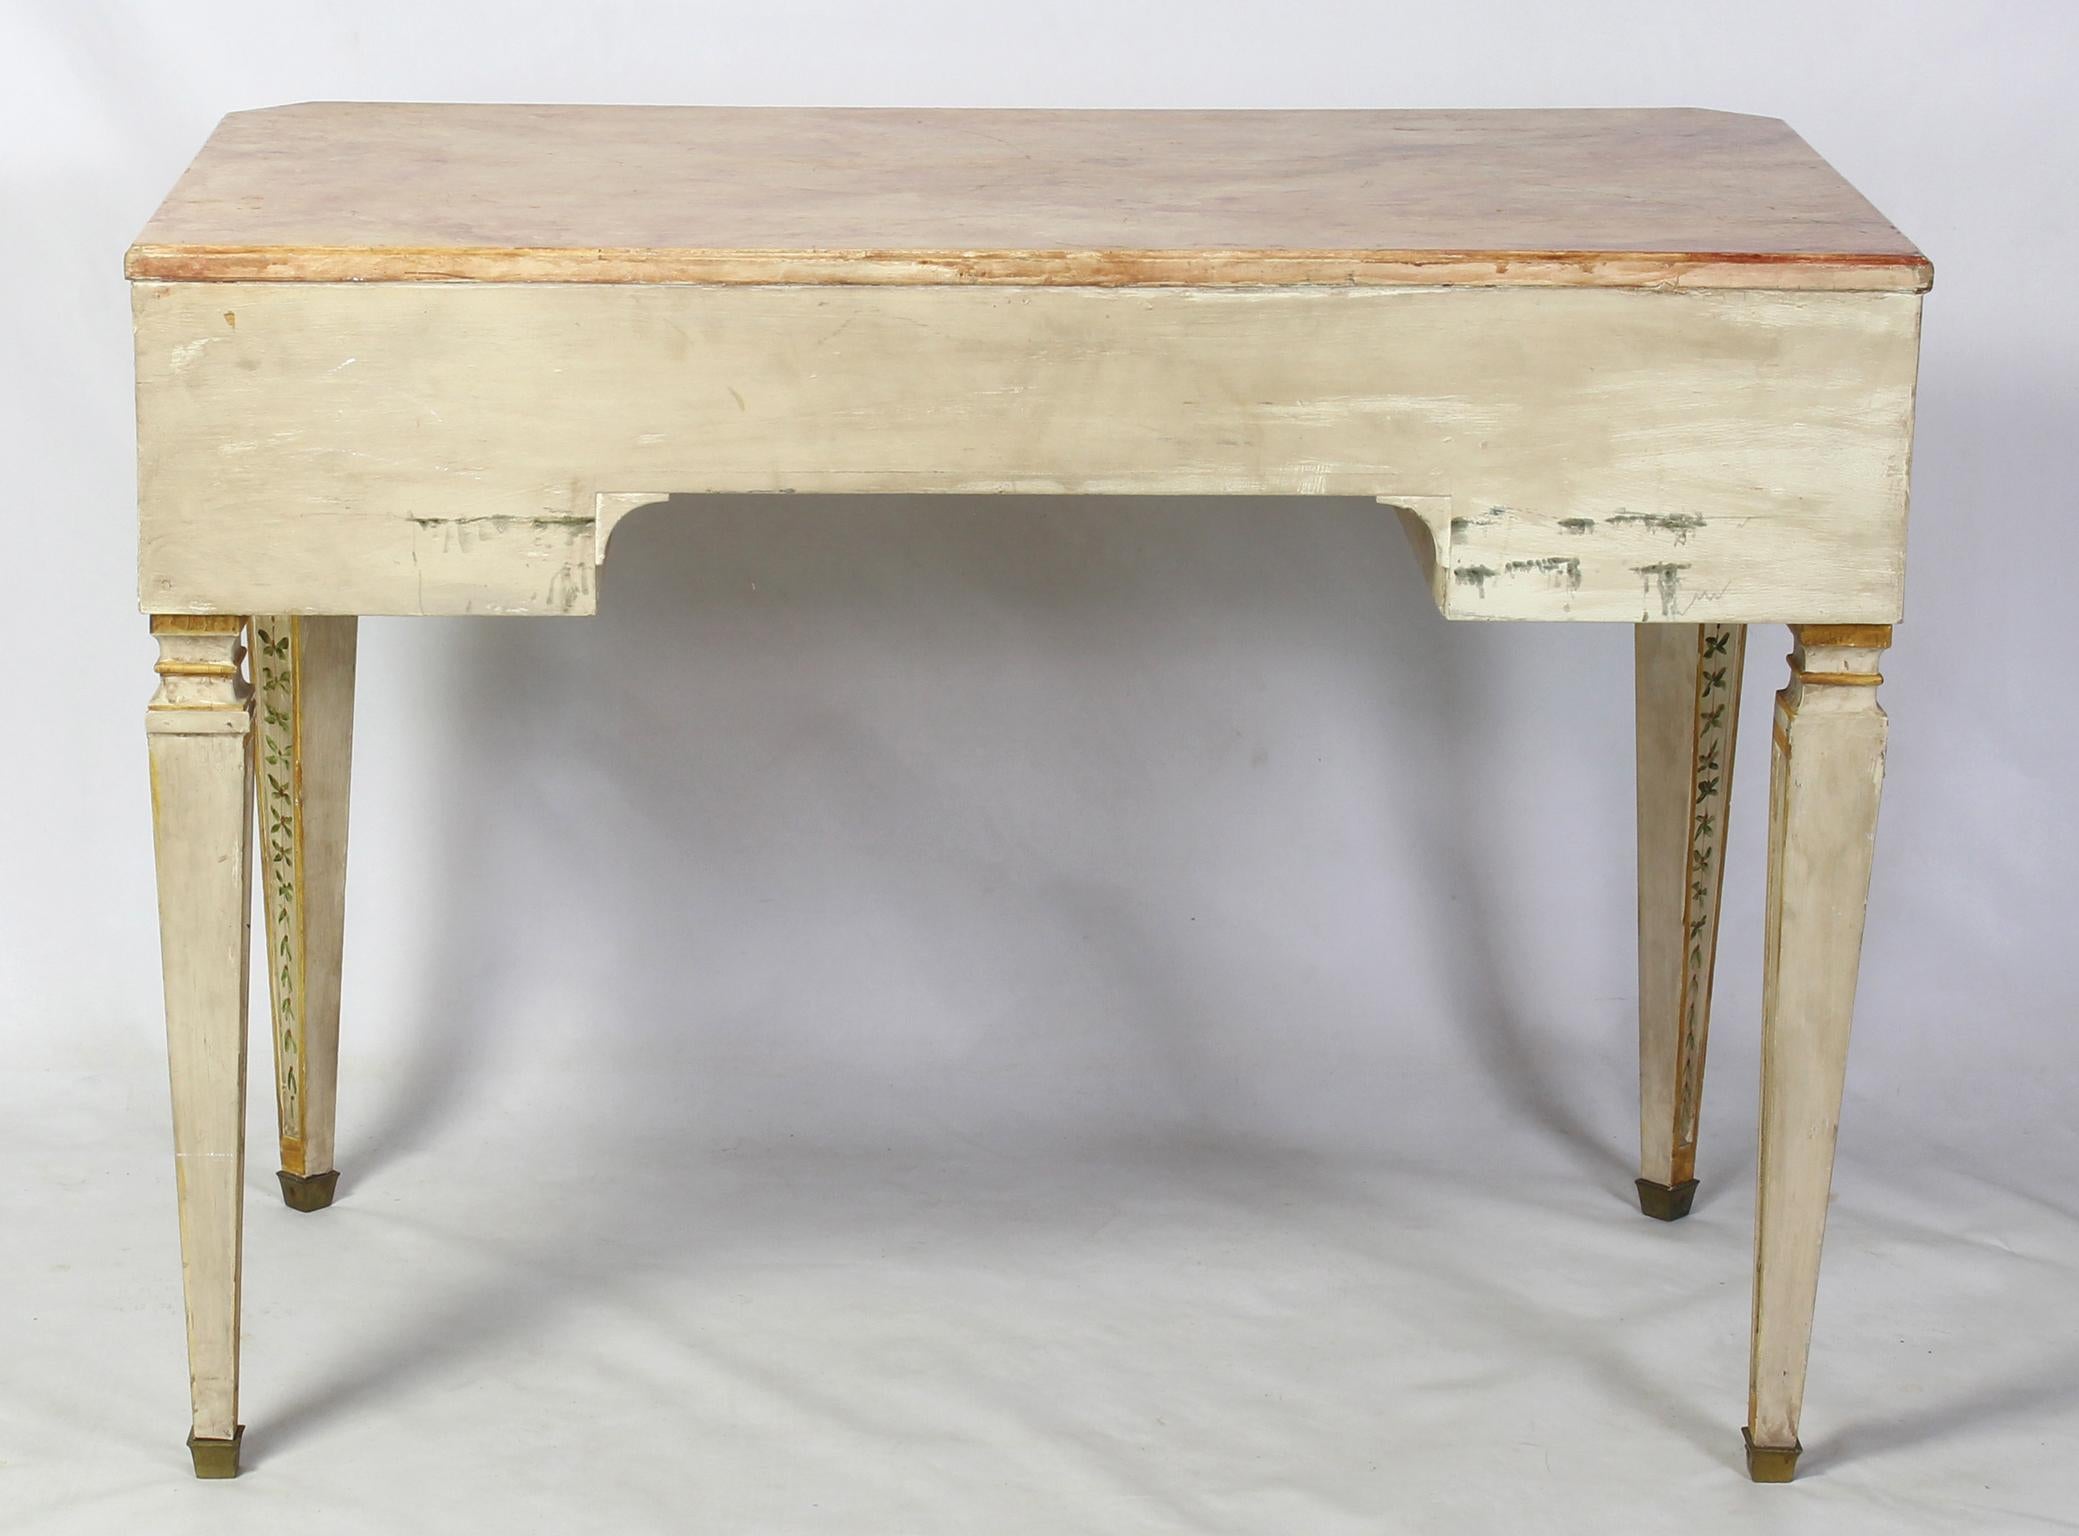 Hand-Painted  Neoclassical Style Painted Dressing Table or Desk